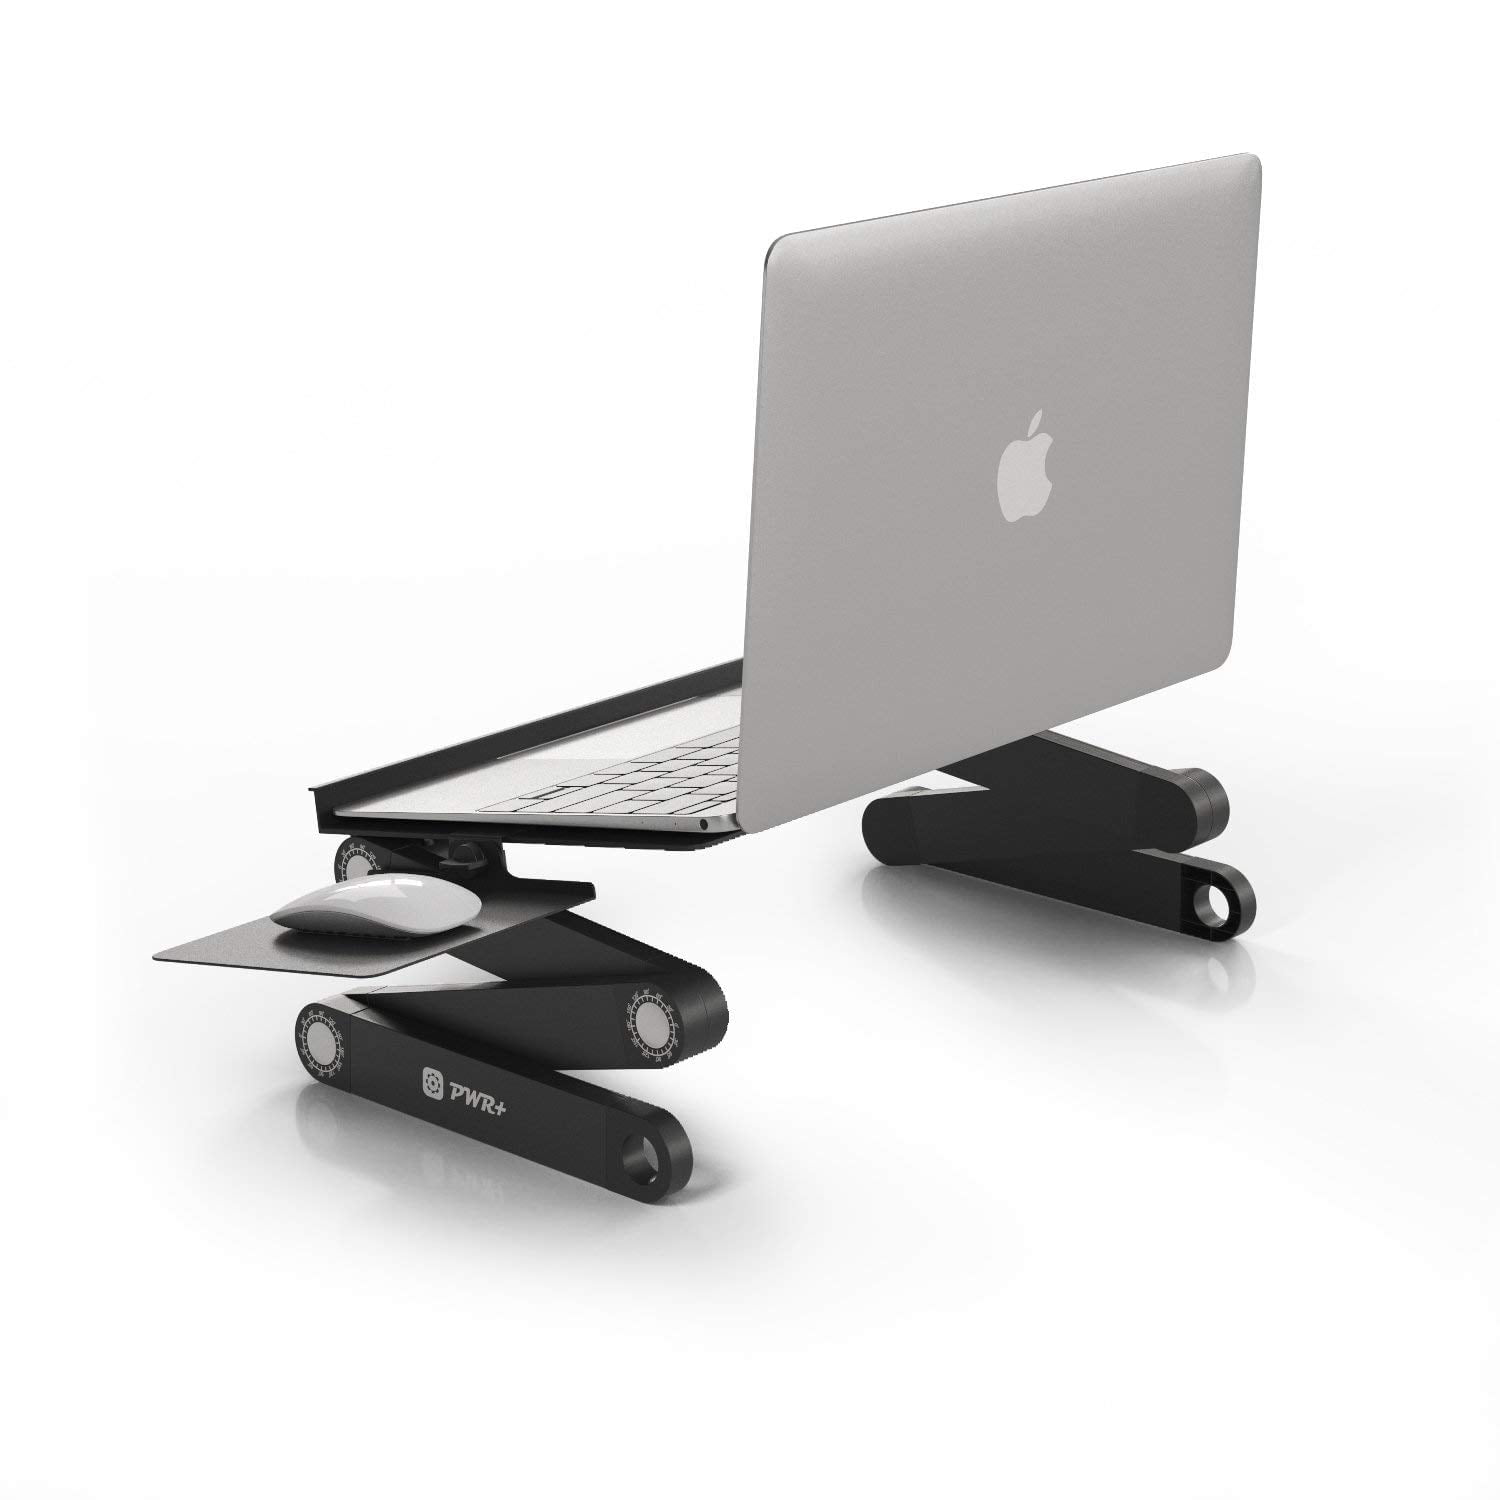 FDN Life Magazine - Laptop Stand for Digital Nomad, Freelancer, Remote Worker or Location Independent - From Amazon.com